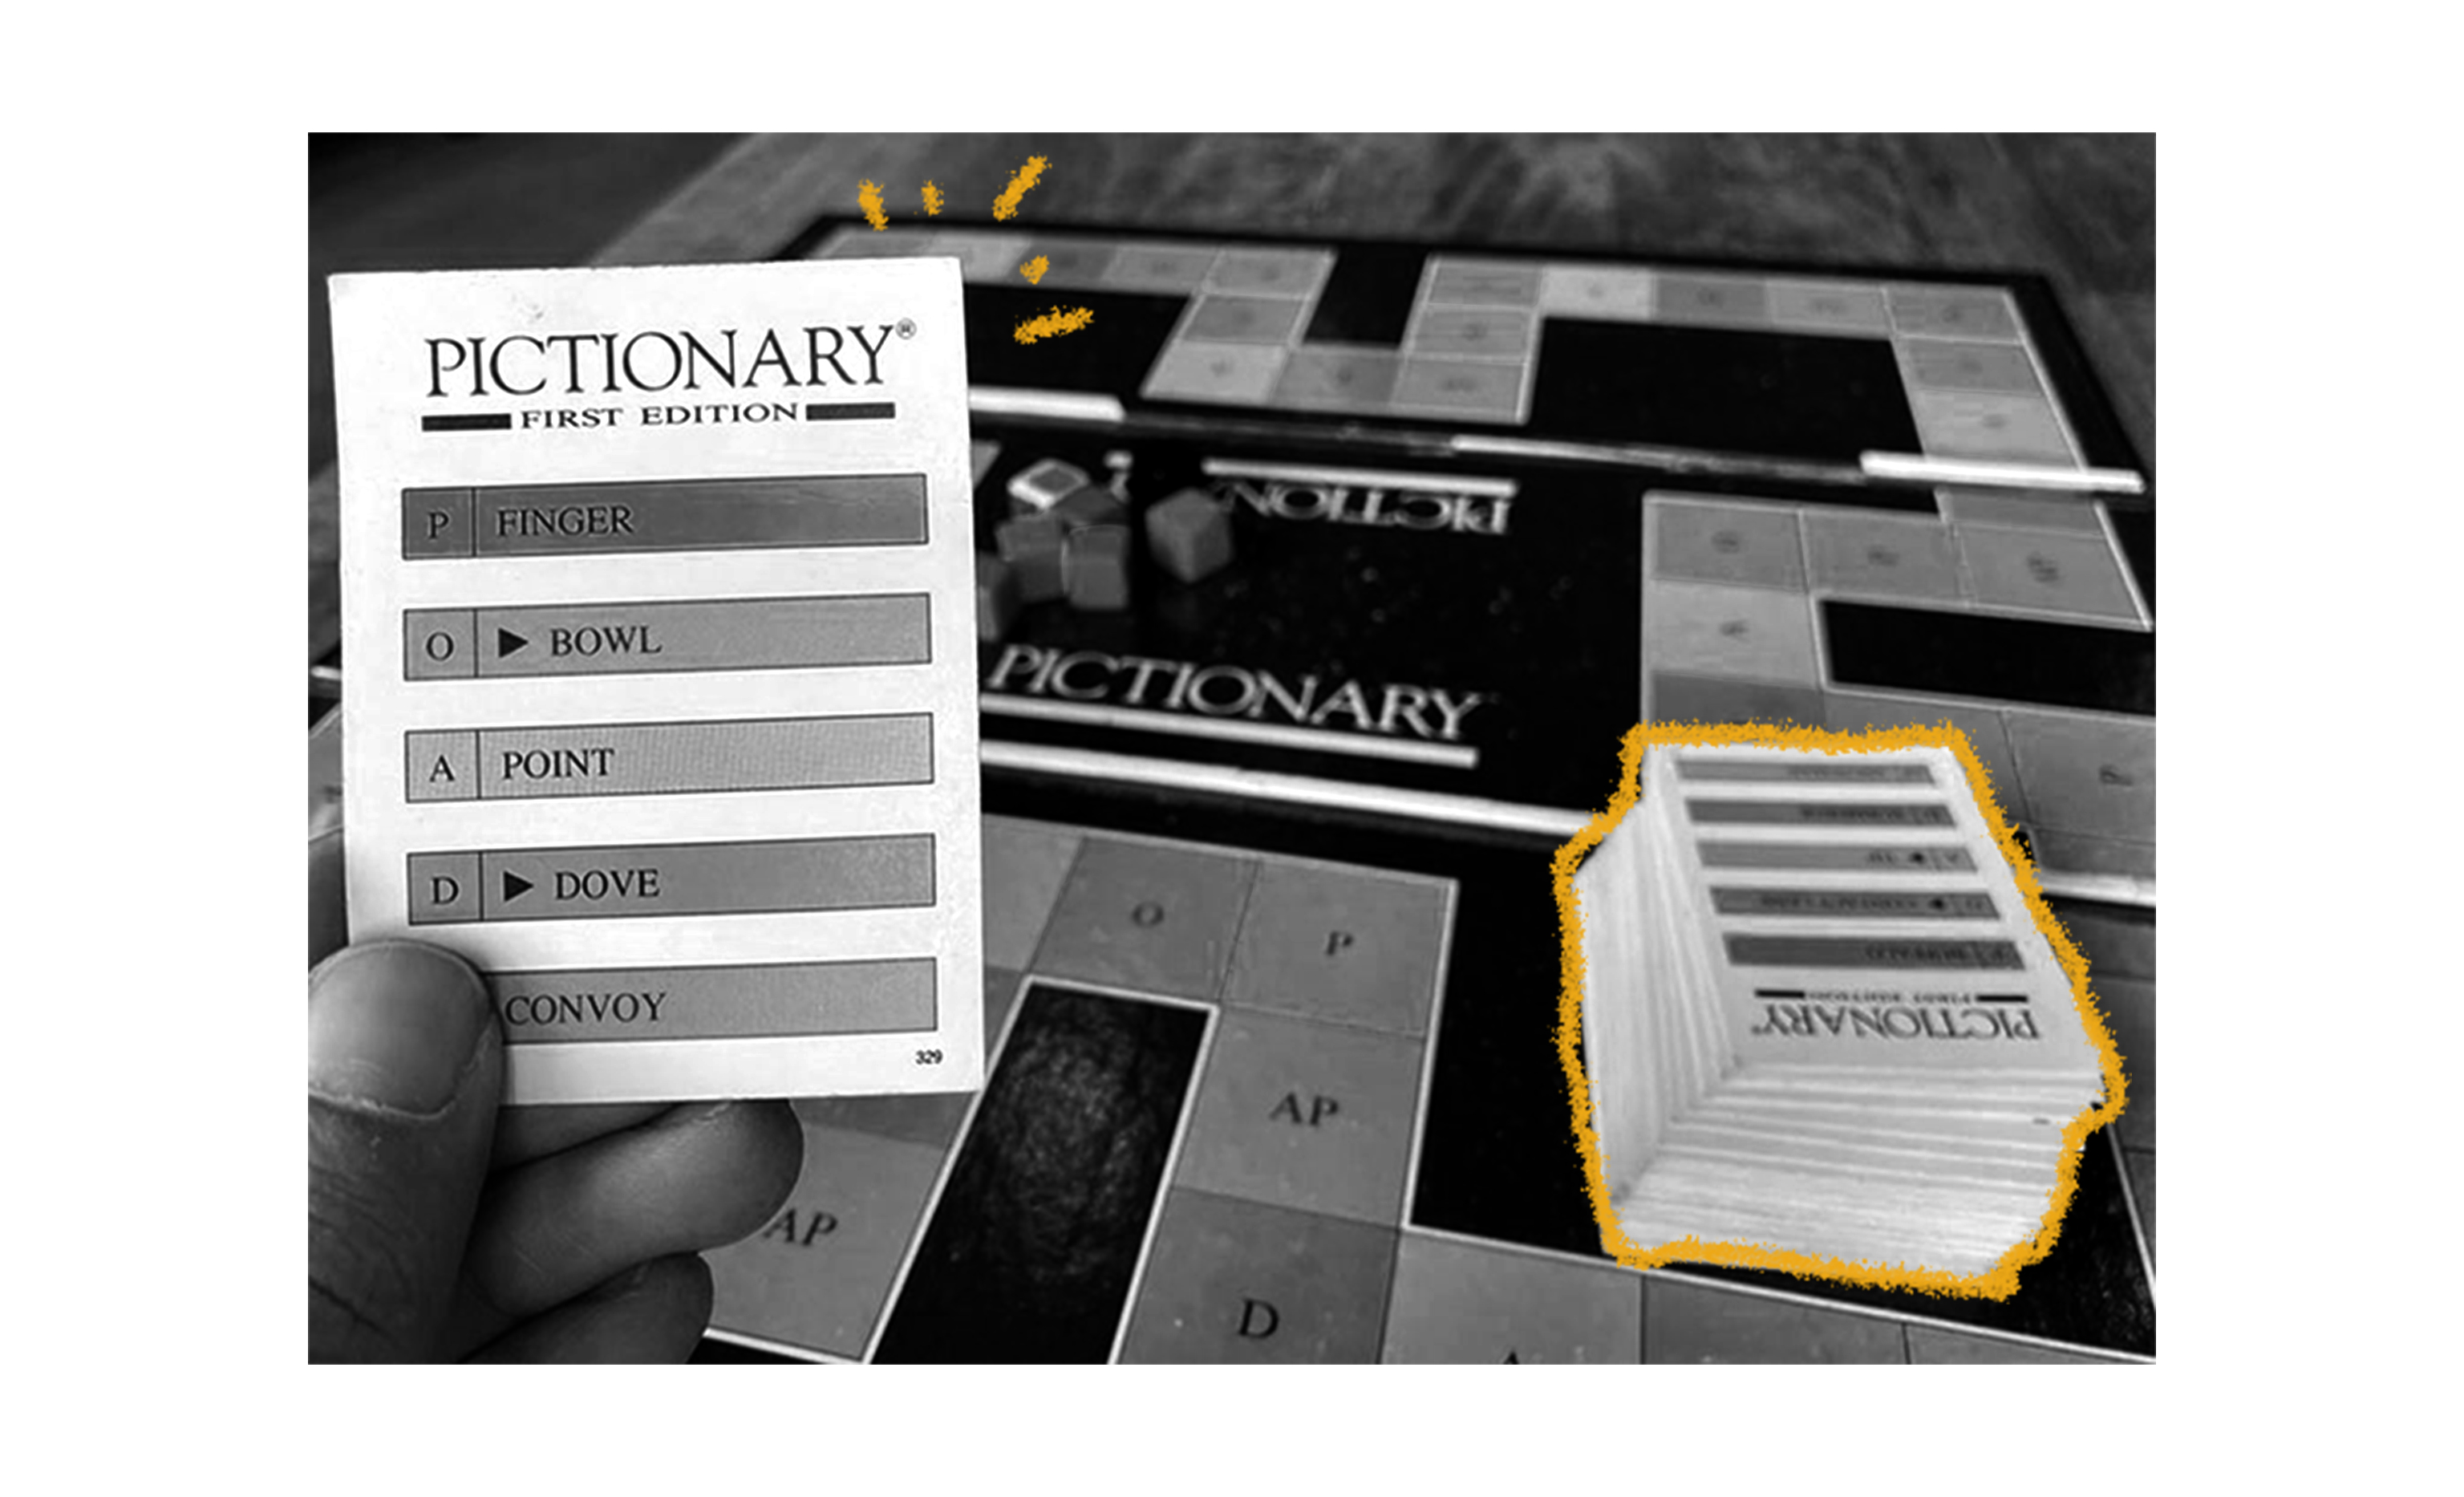 The History of Pictionary